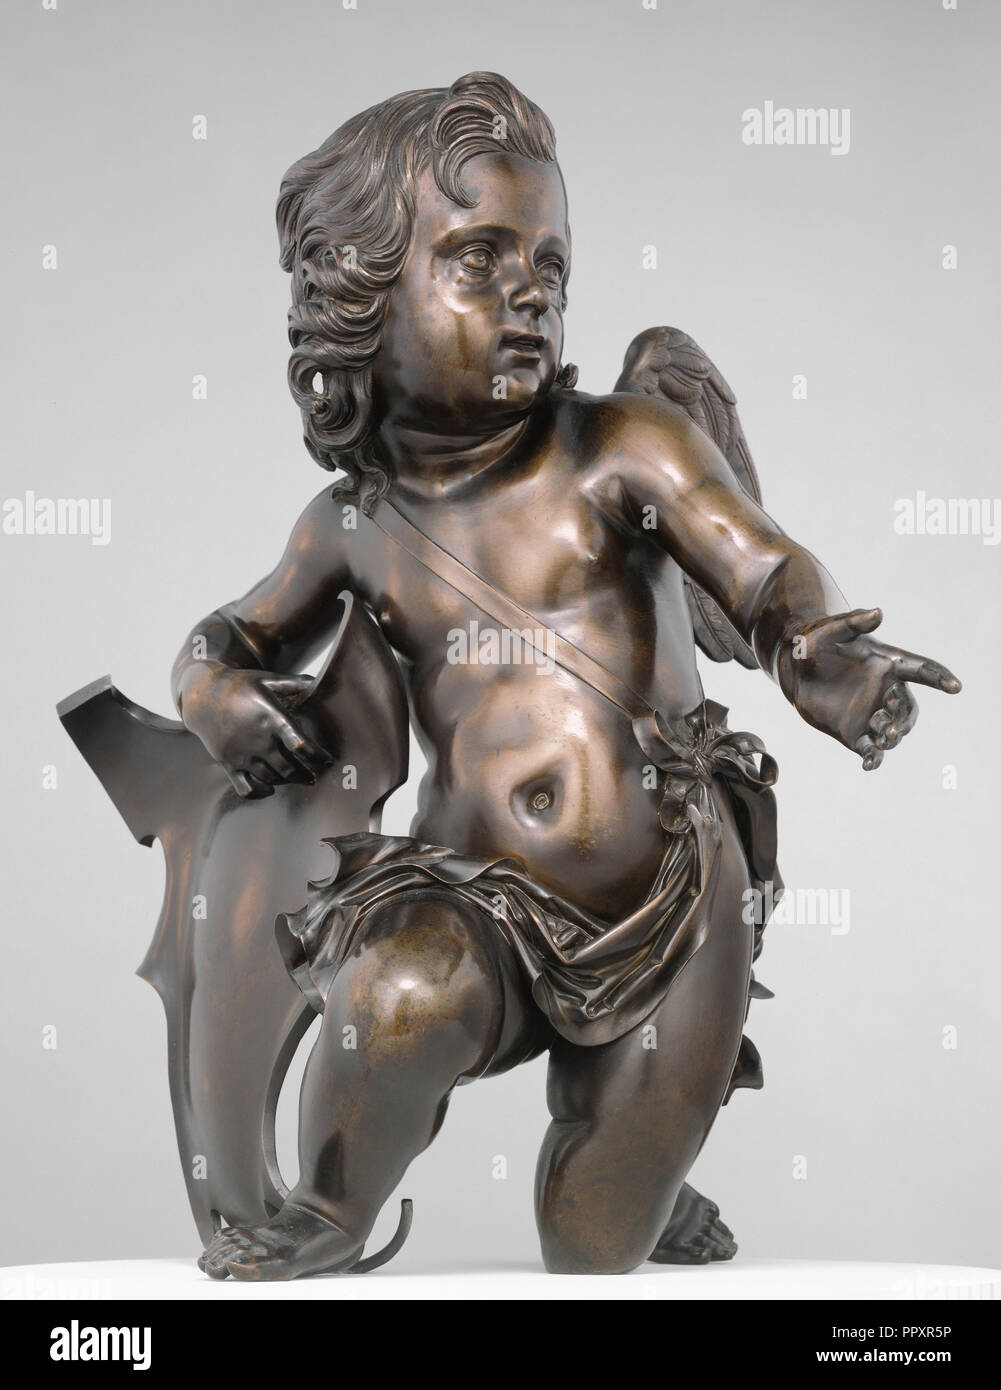 Putto Holding Shield to His Right; Ferdinando Tacca, Italian, 1619 - 1686, Florence, Tuscany, Italy; about 1650 - 1655; Bronze Stock Photo